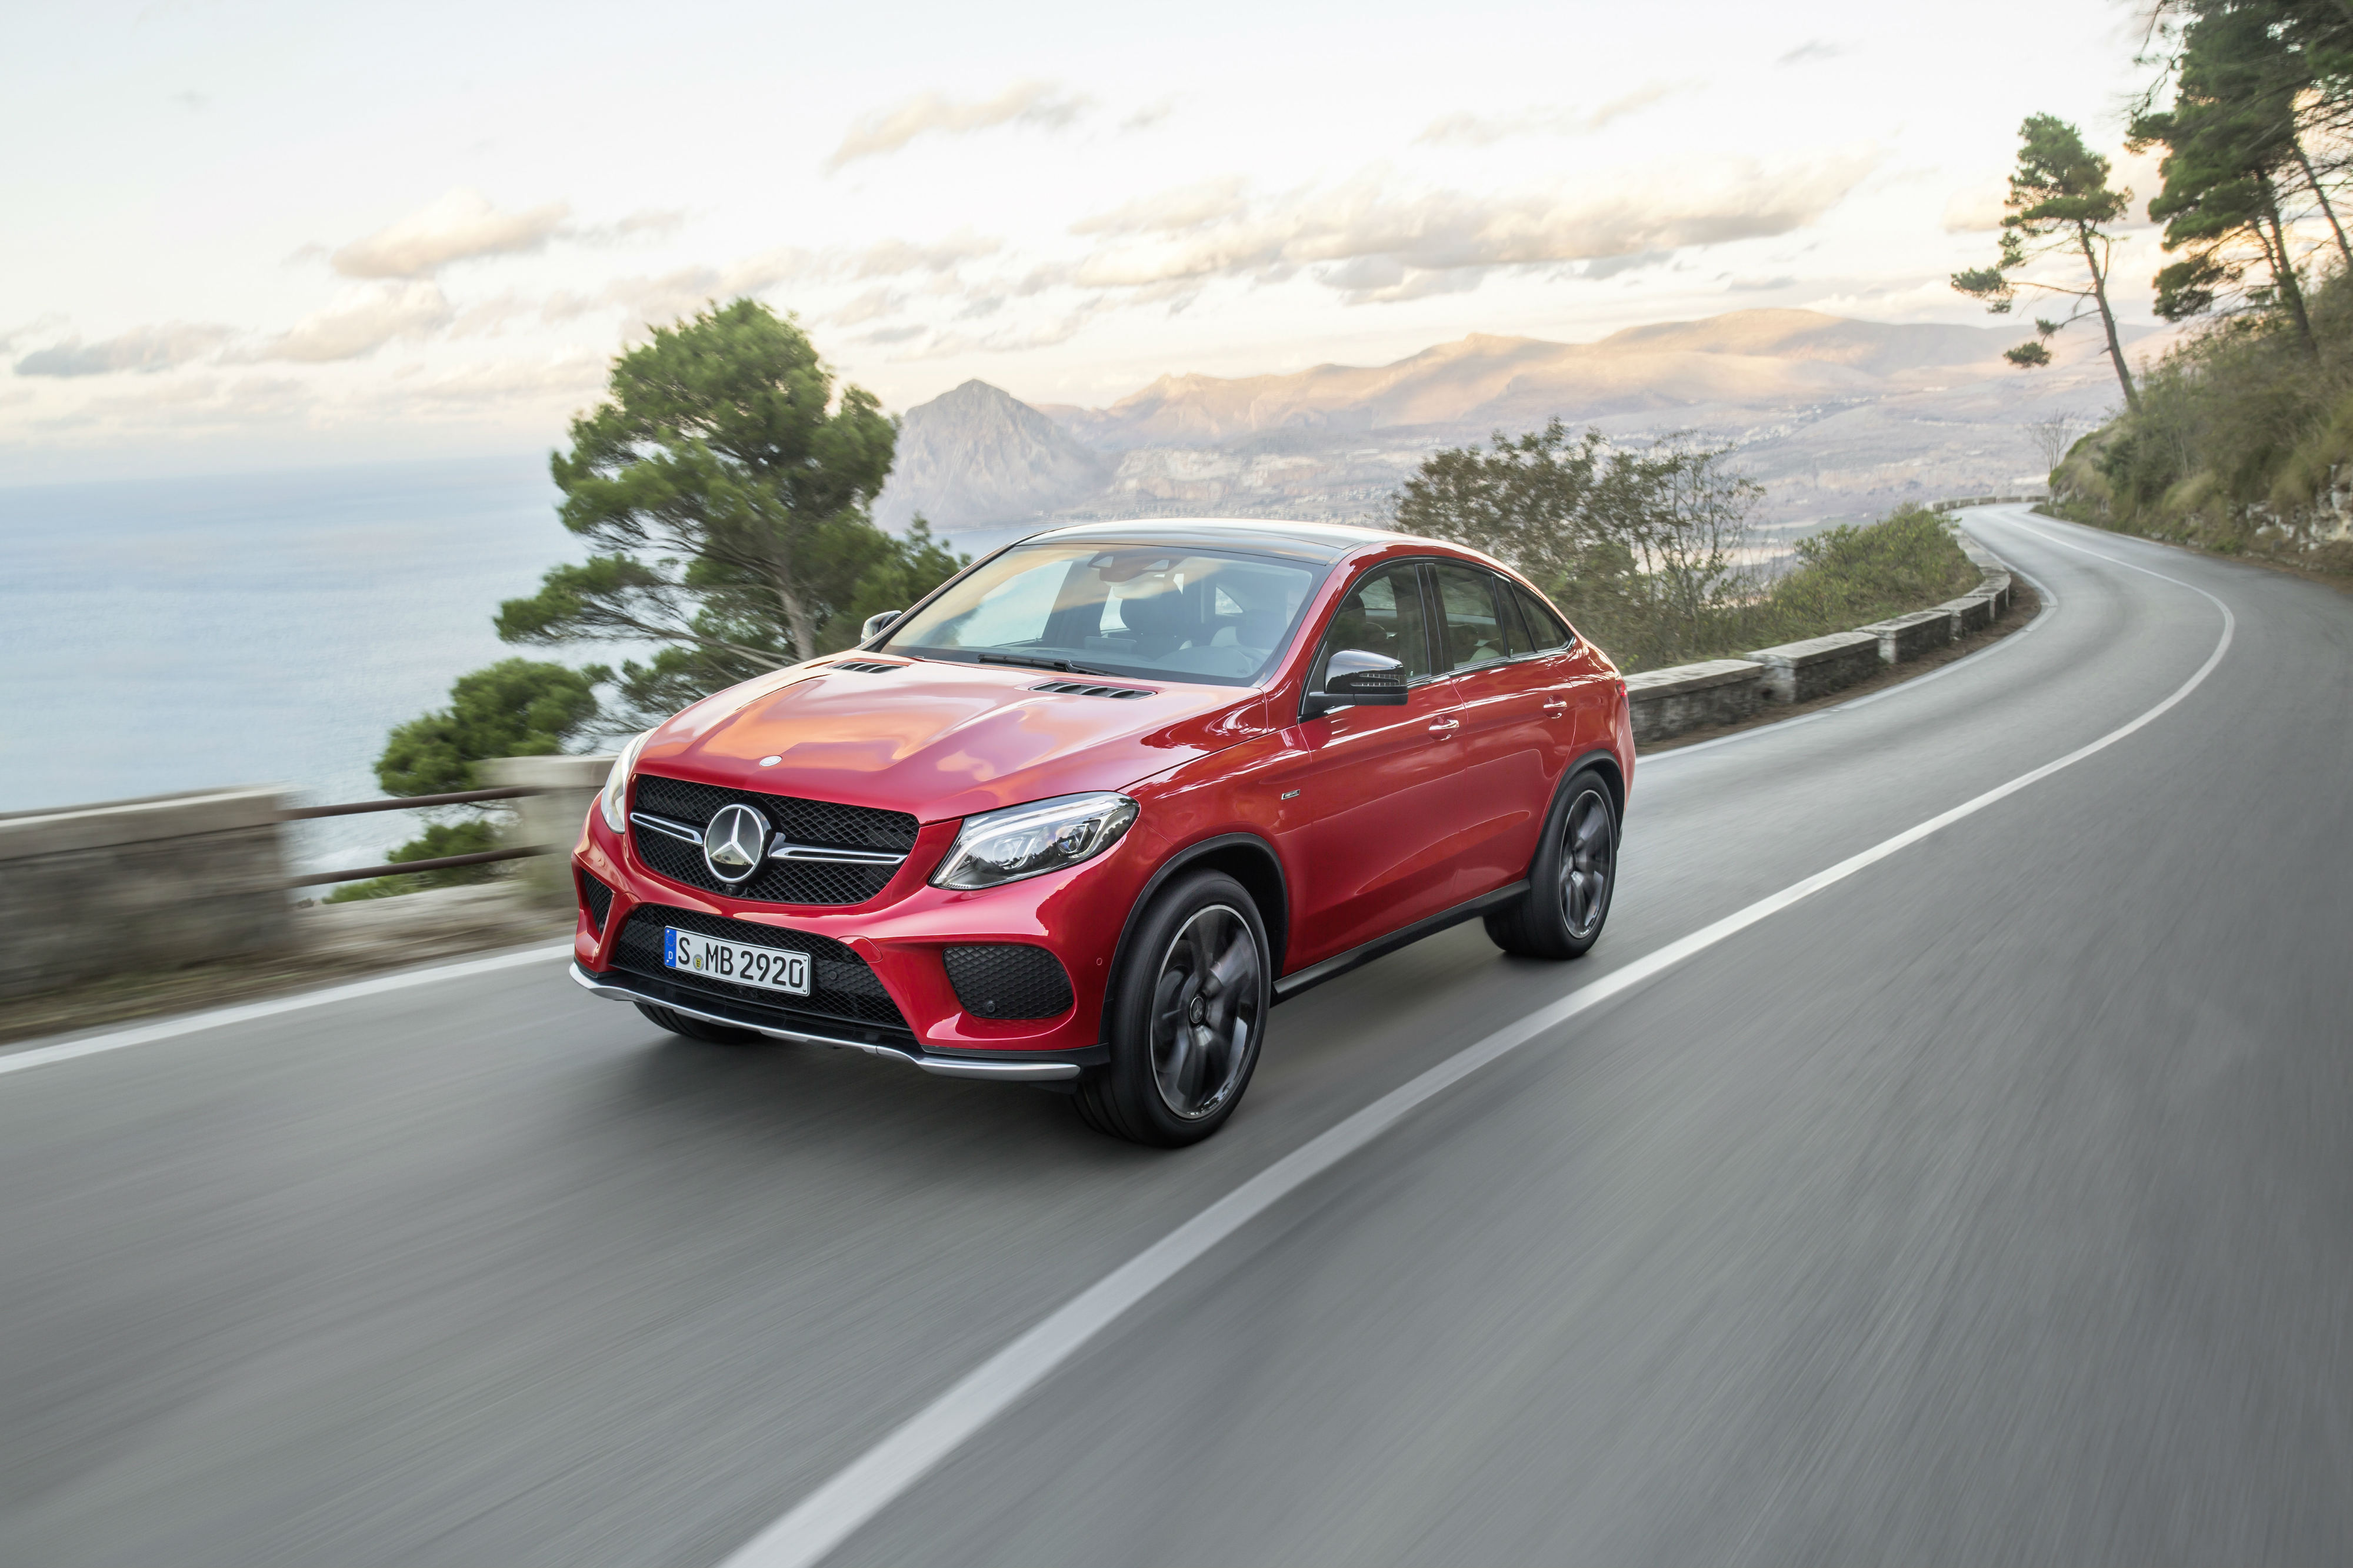 Mercedes GLE Coupe front view